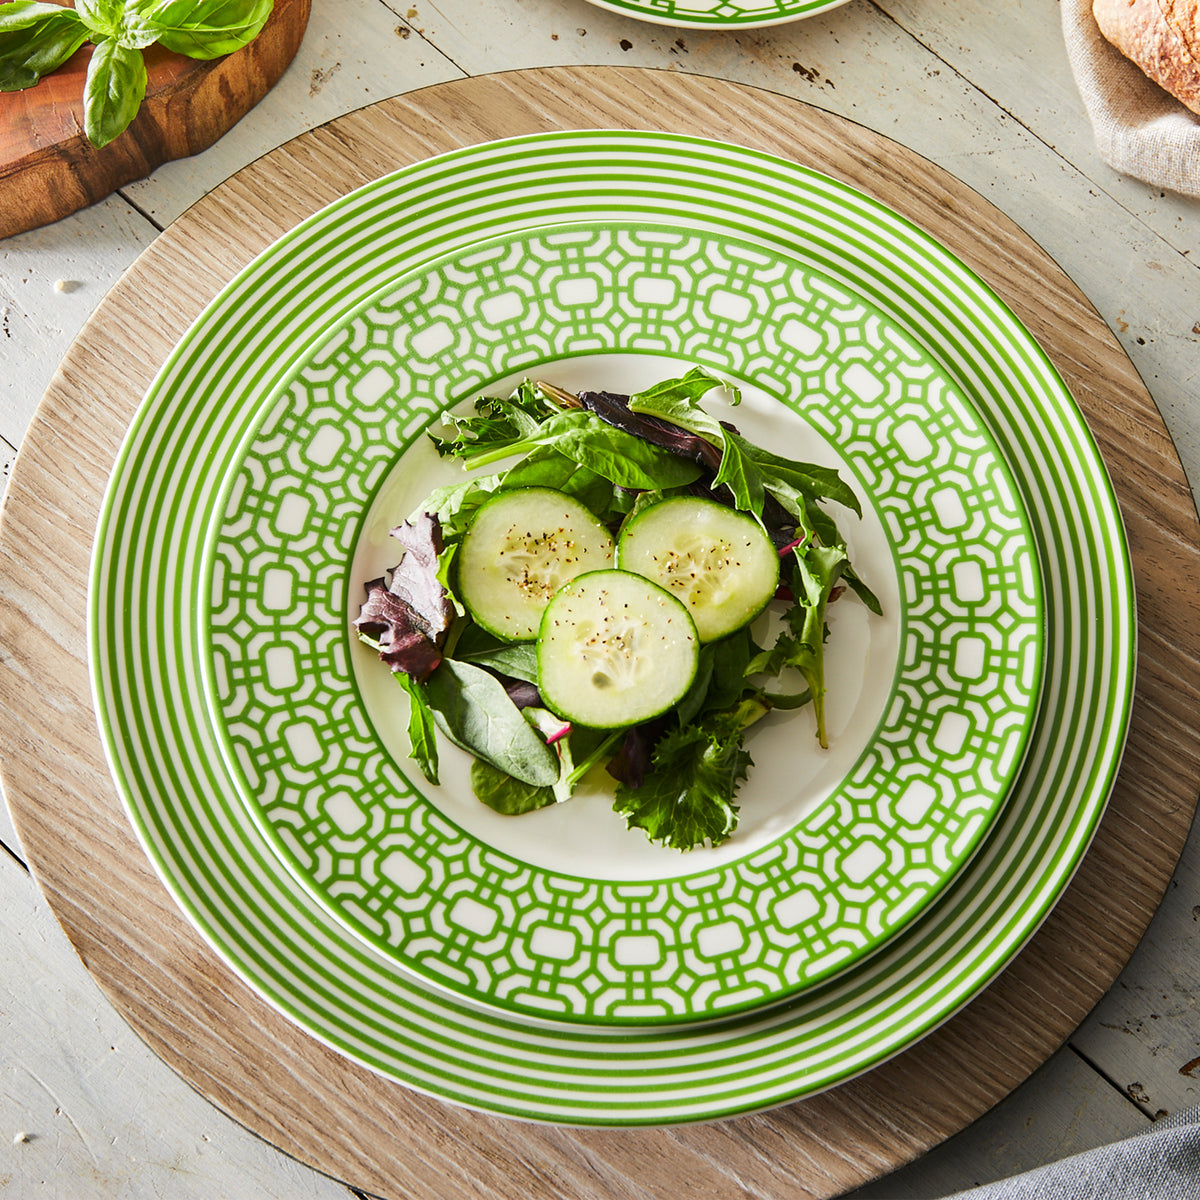 A salad with greens and cucumber slices is served on a Newport Garden Gate Verde Rimmed Salad Plate by Caskata Artisanal Home, placed on a wooden charger and a wooden table. The contemporary tableware adds an elegant touch to the Newport Garden Gate setting.